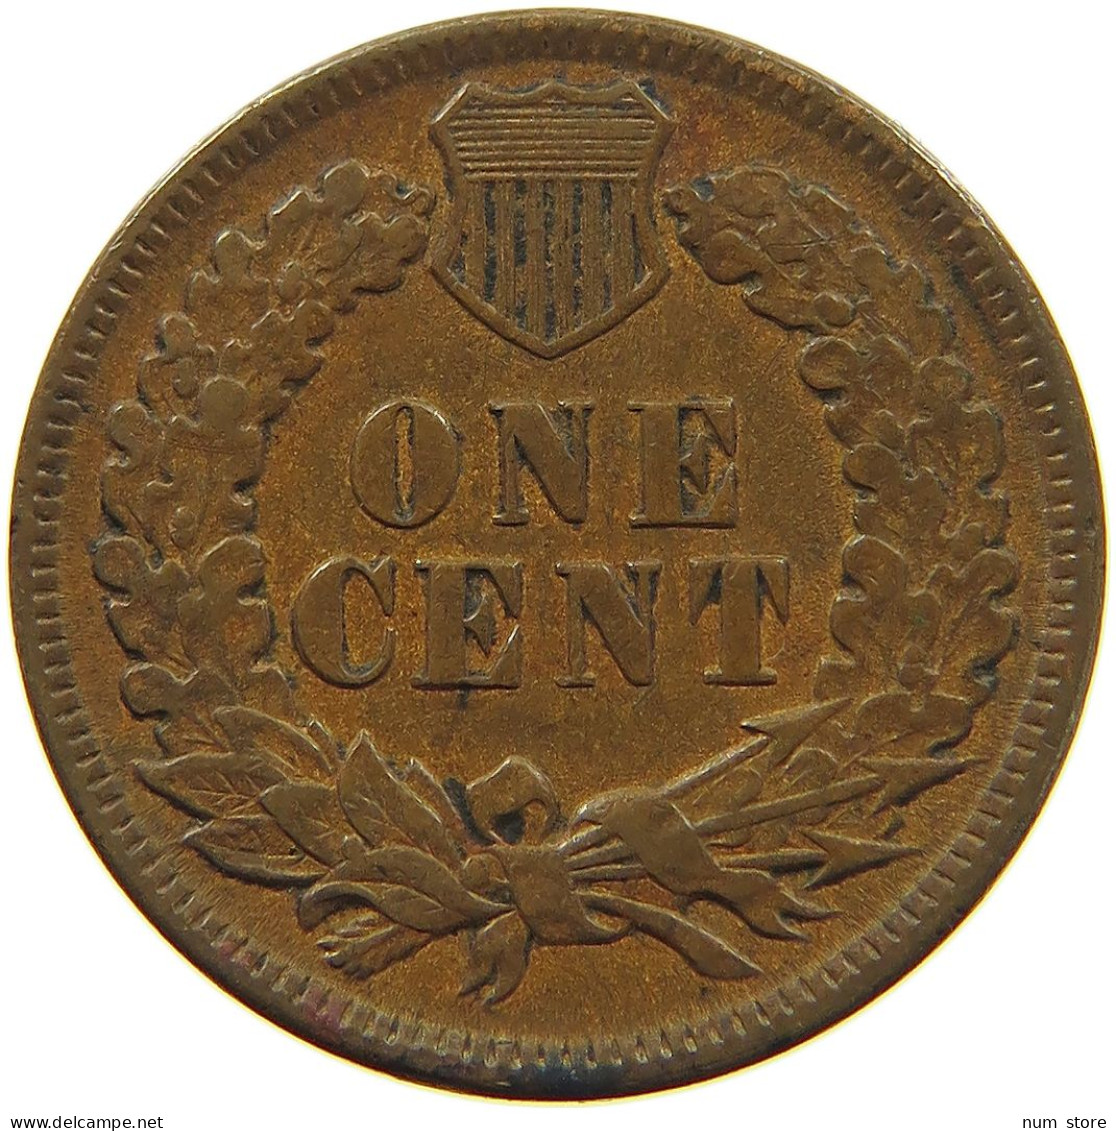 UNITED STATES OF AMERICA CENT 1895 INDIAN HEAD #c007 0175 - 1859-1909: Indian Head